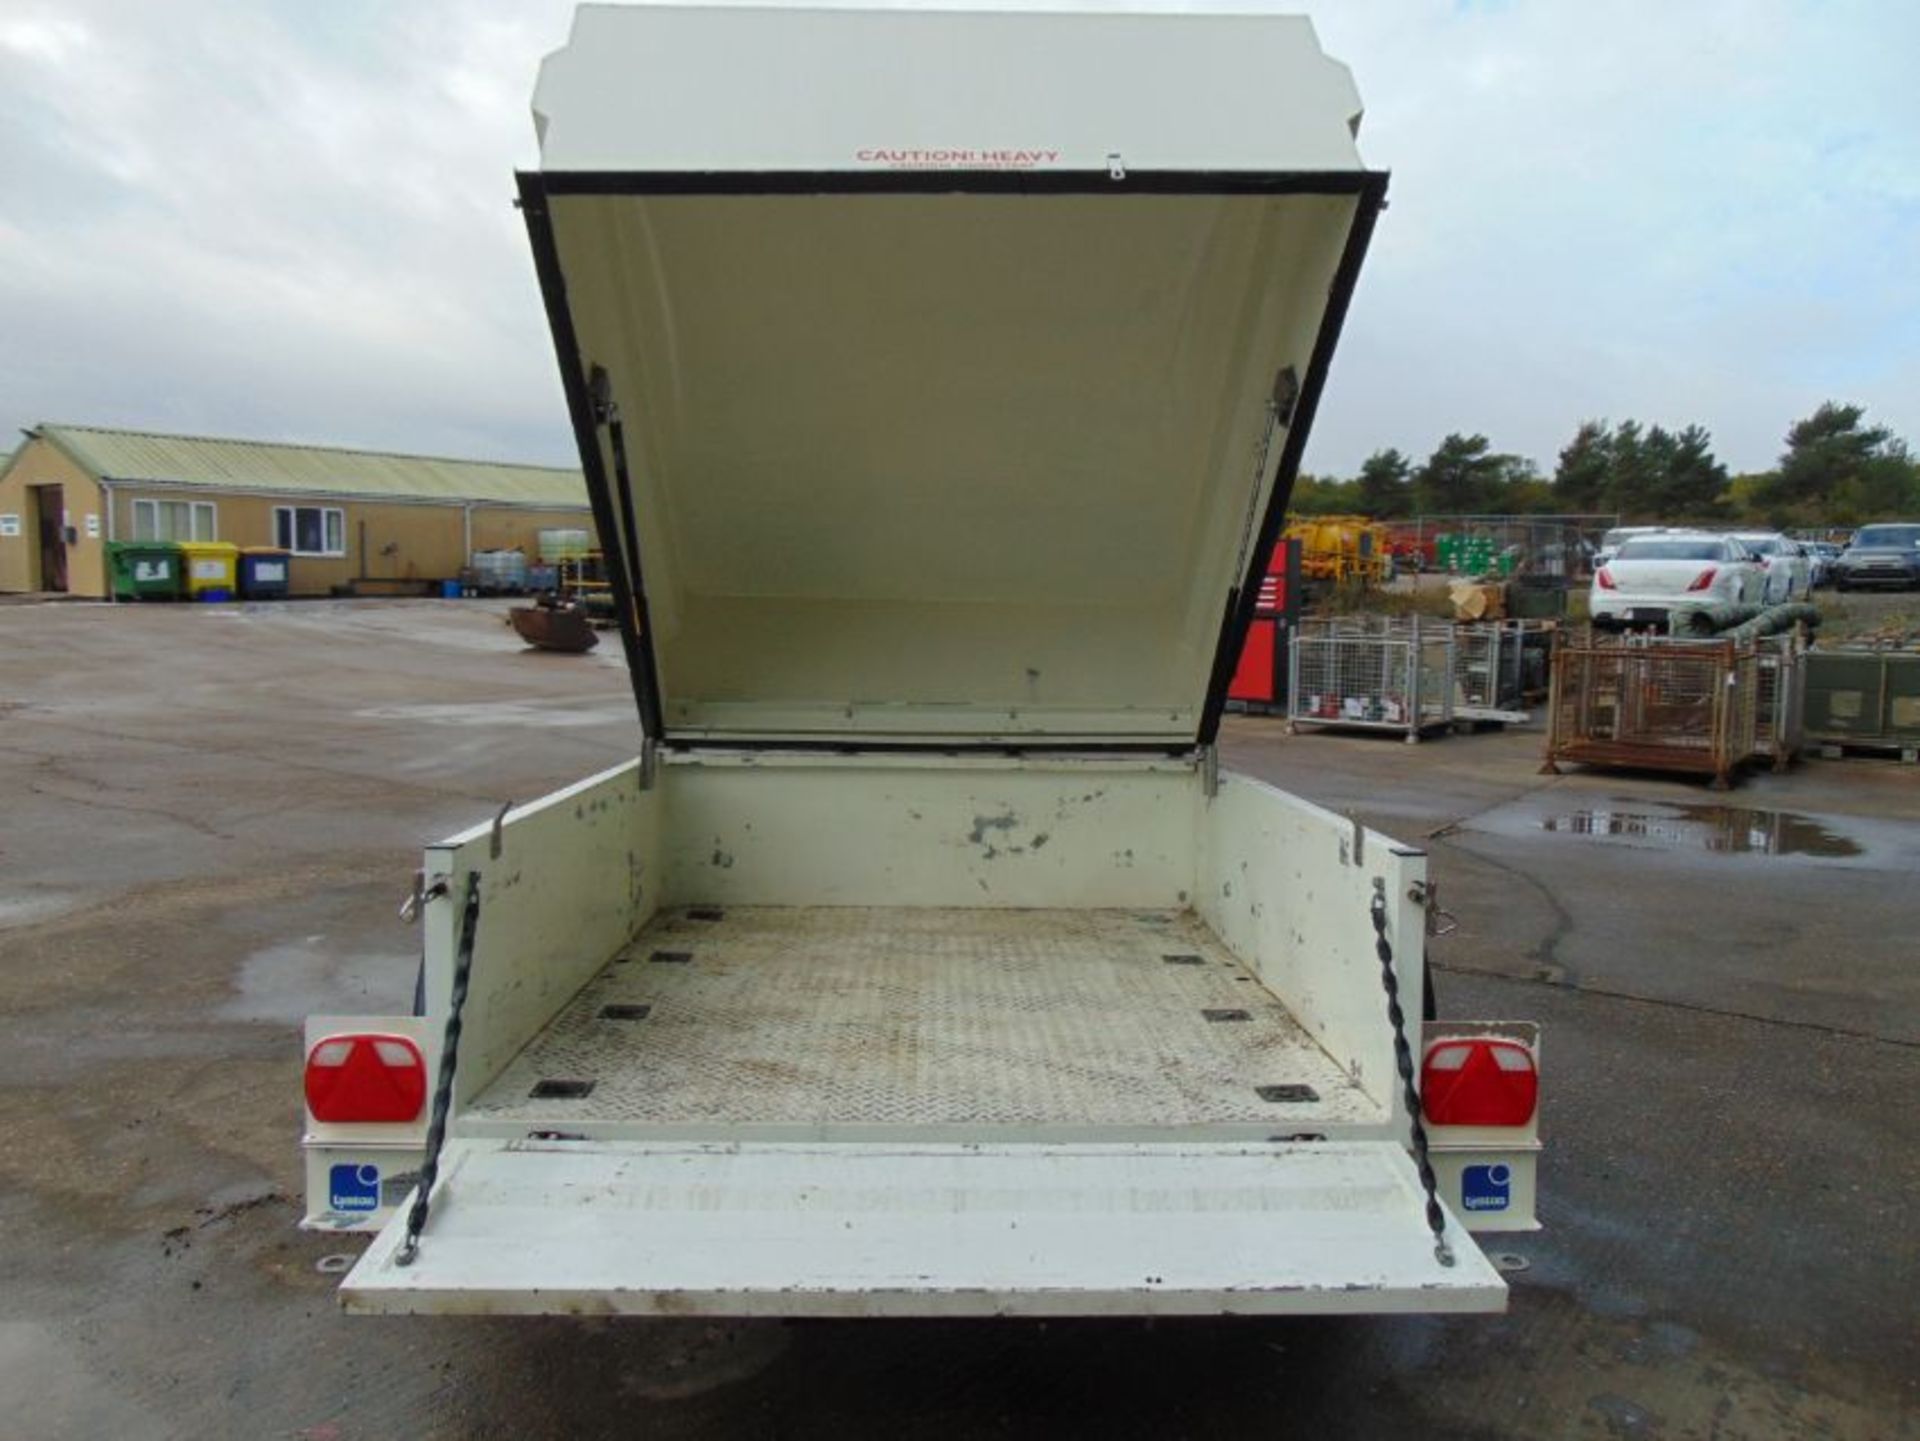 2016 Lynton Single Axle Covered Trailer c/w Gas Strut Assisted Pop Up Lid (CAMP/EXPEDITION TRAILER) - Image 11 of 18